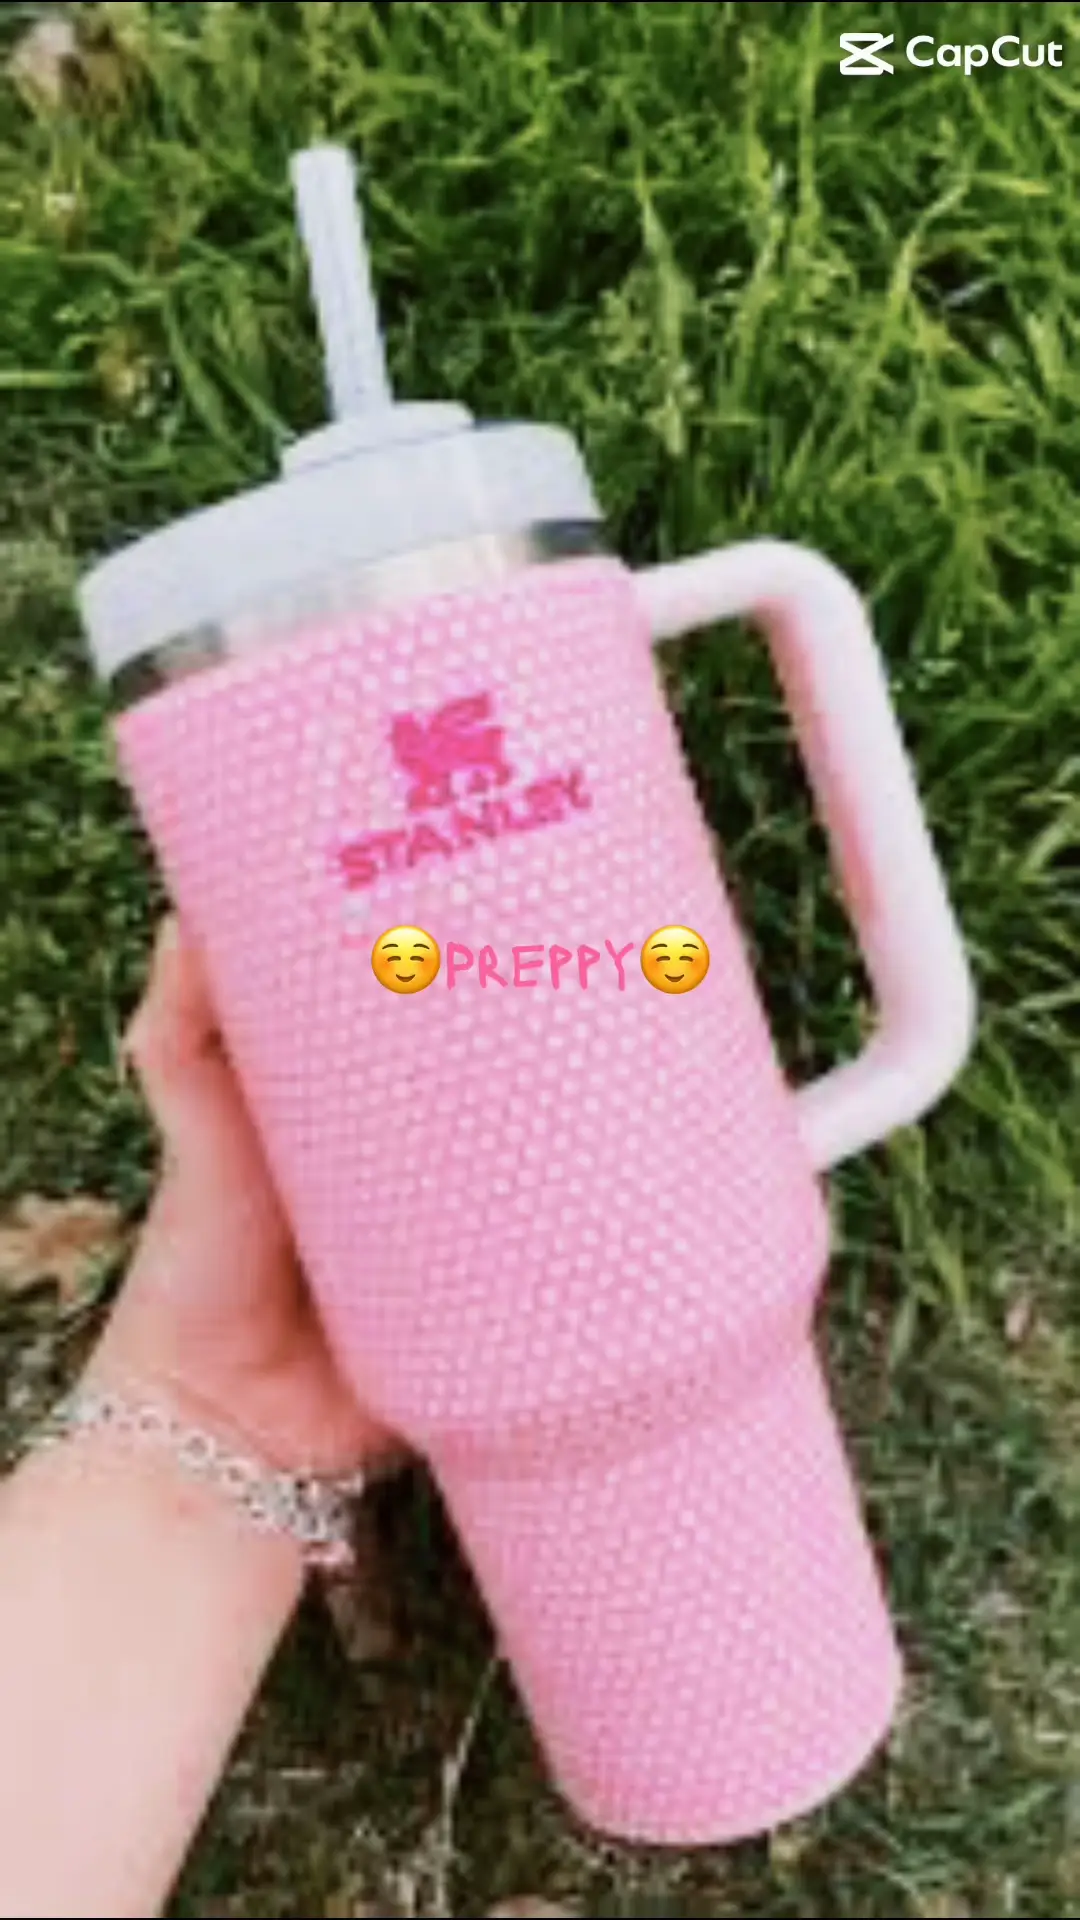  Preppy Stuff Phone Pouch For Stanley Tumblers Quencher